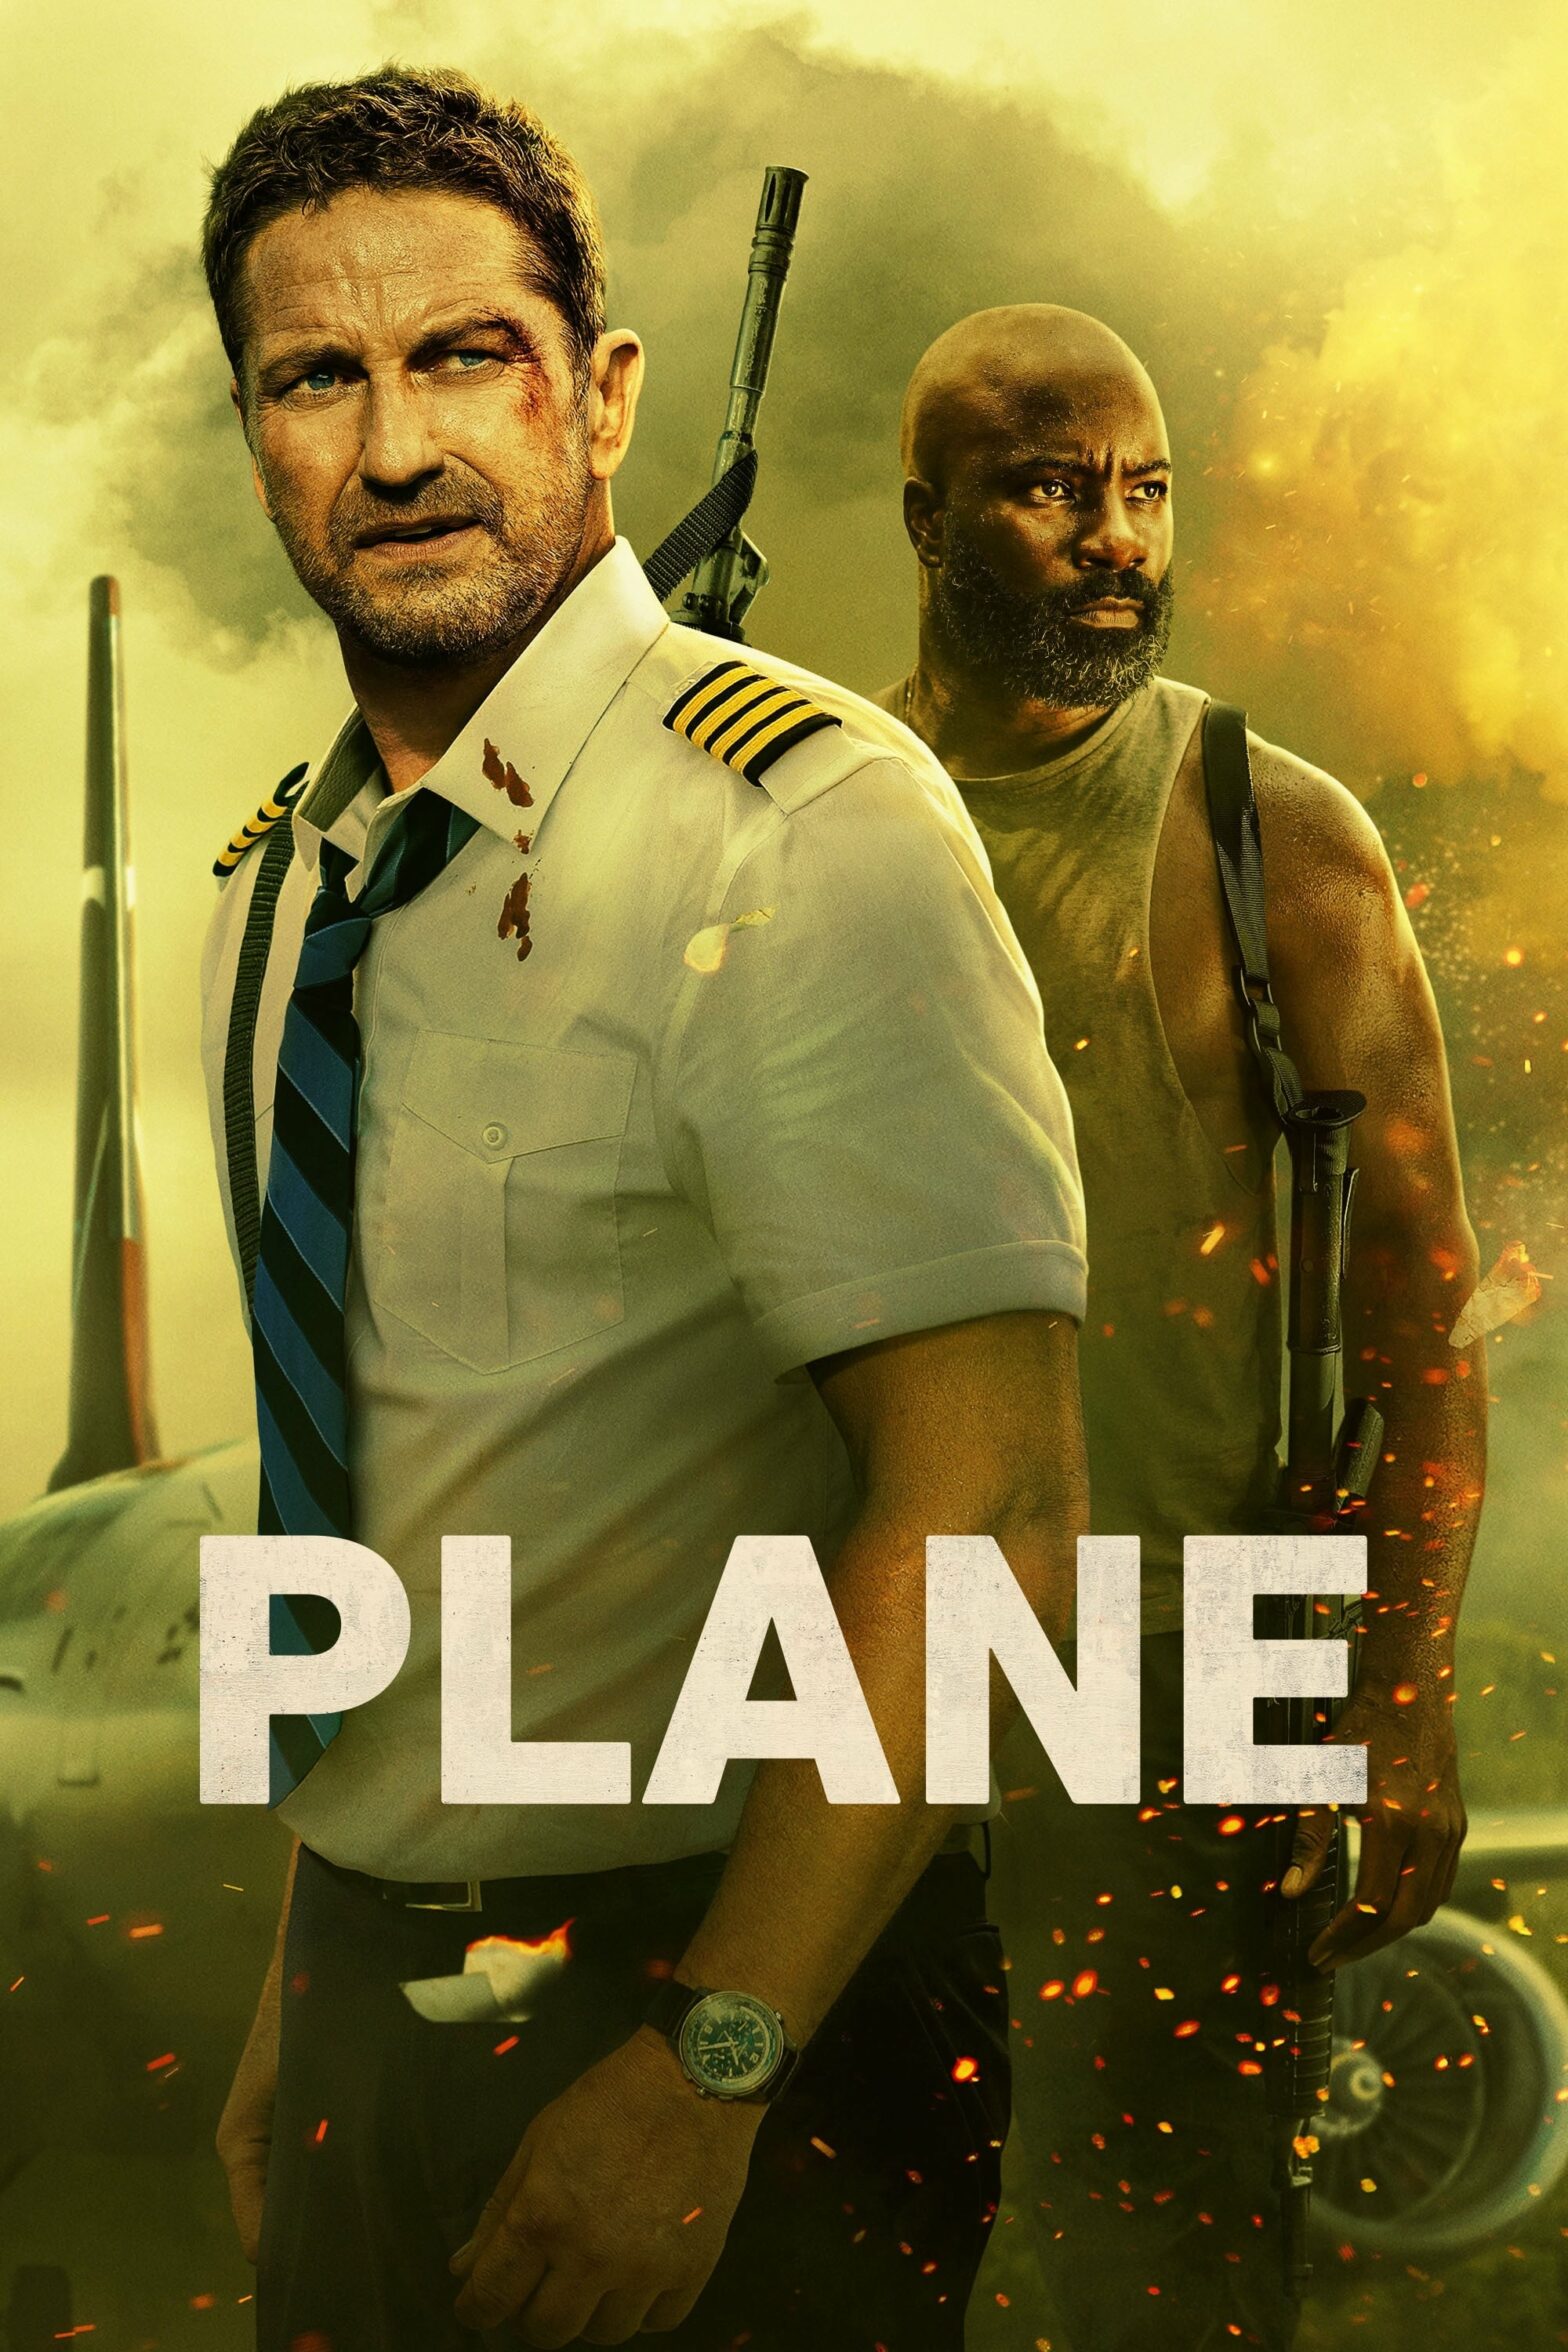 Poster for the movie "Plane"